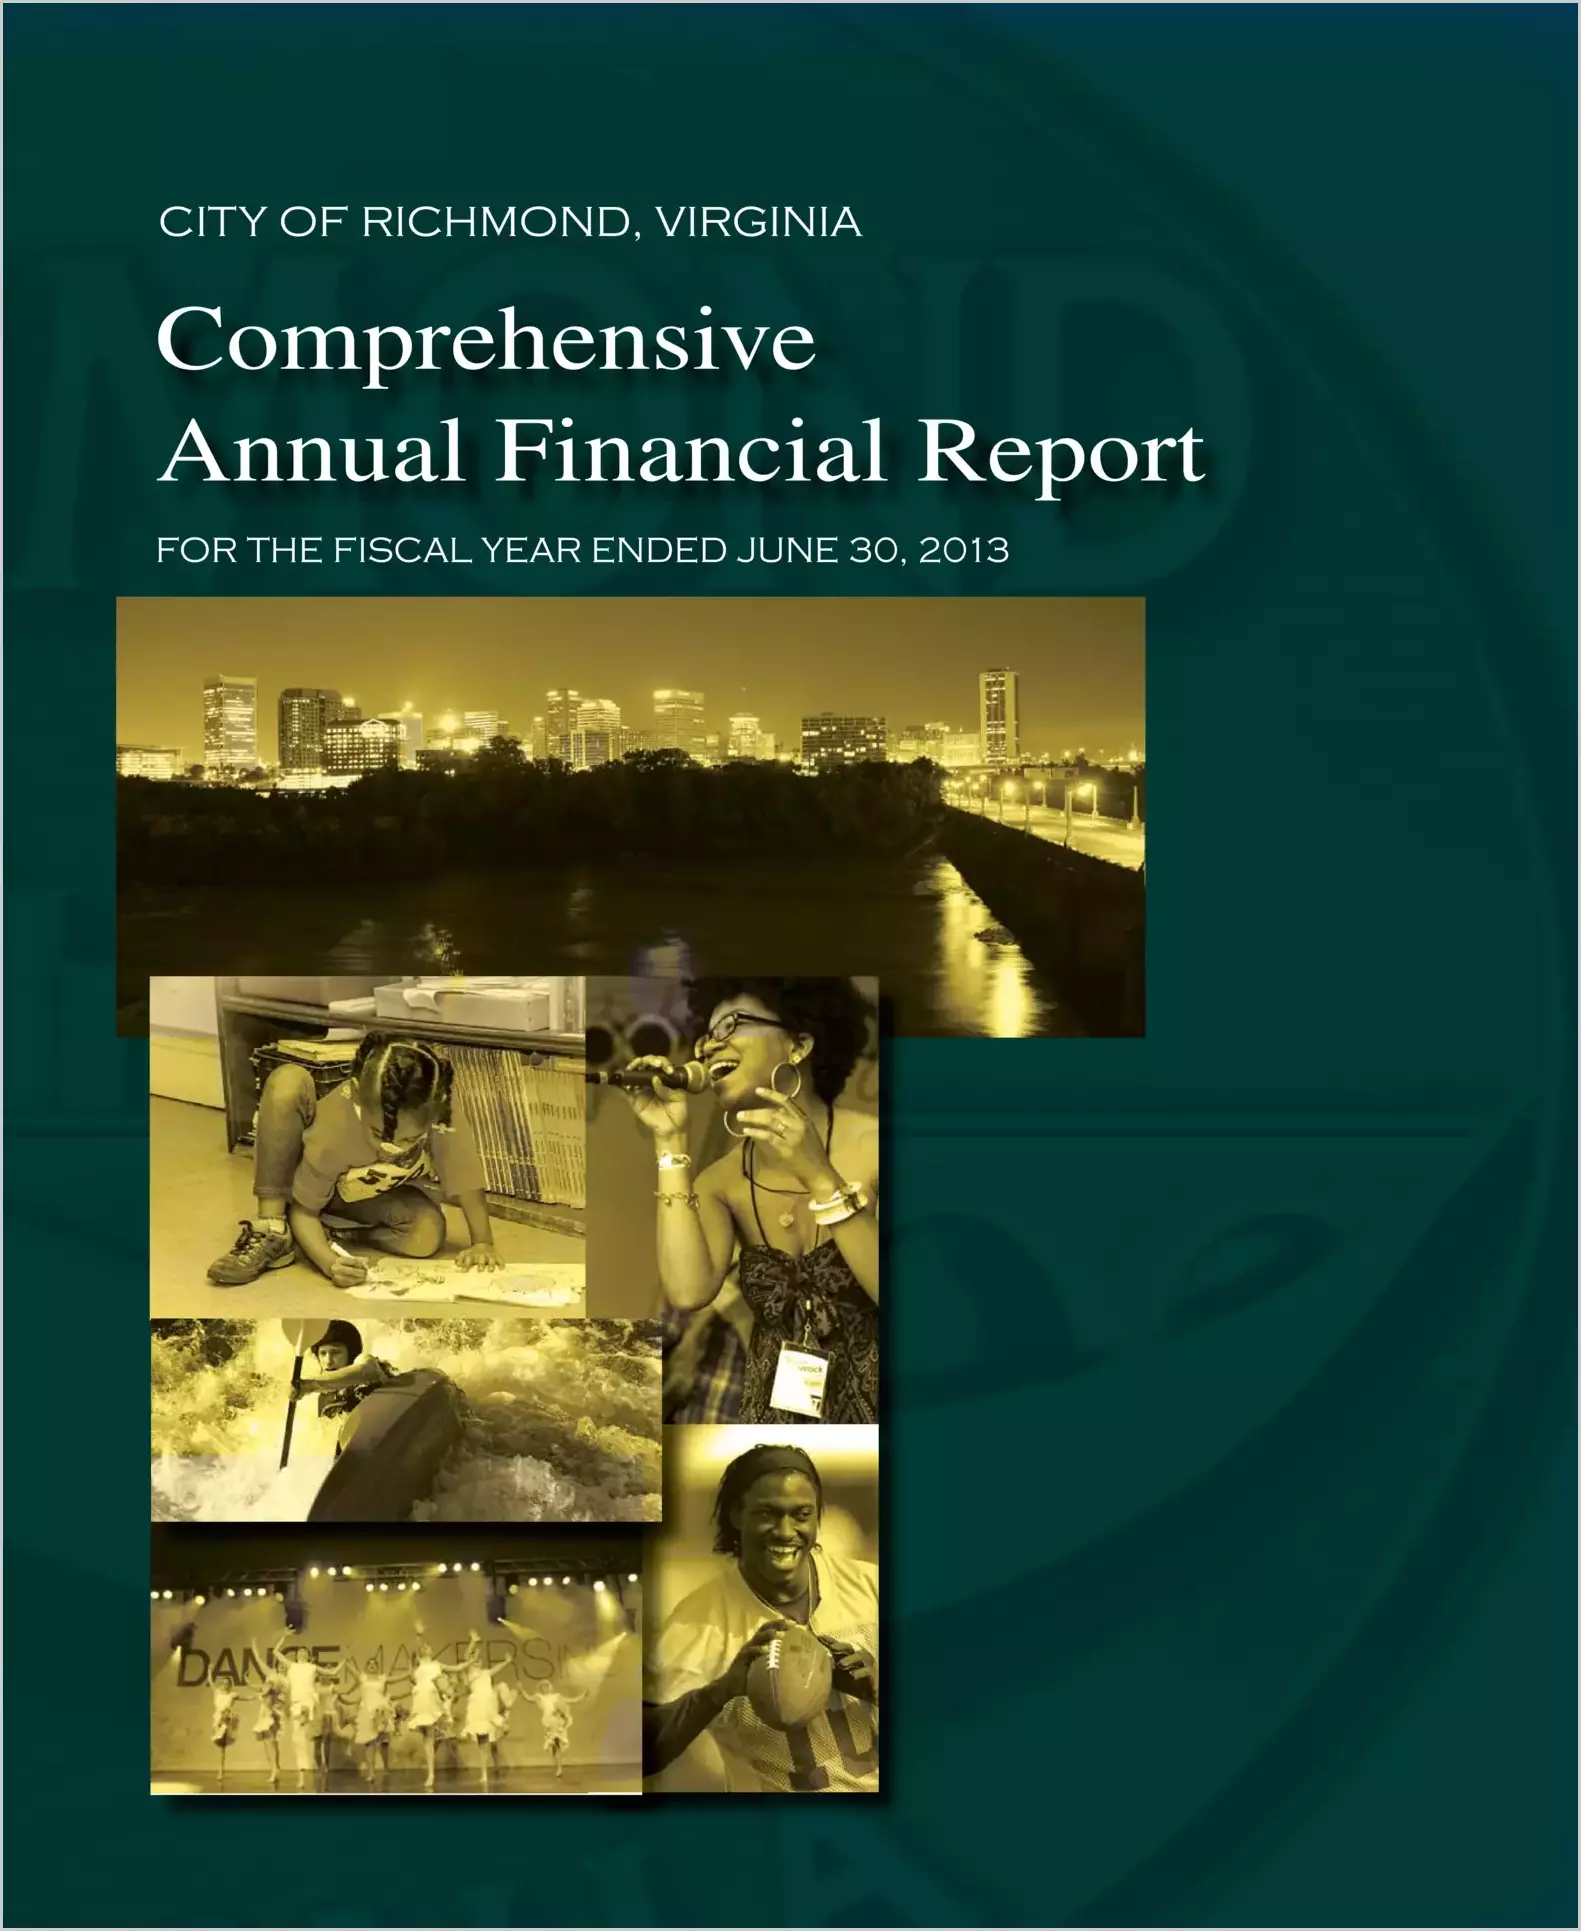 2013 Annual Financial Report for City of Richmond